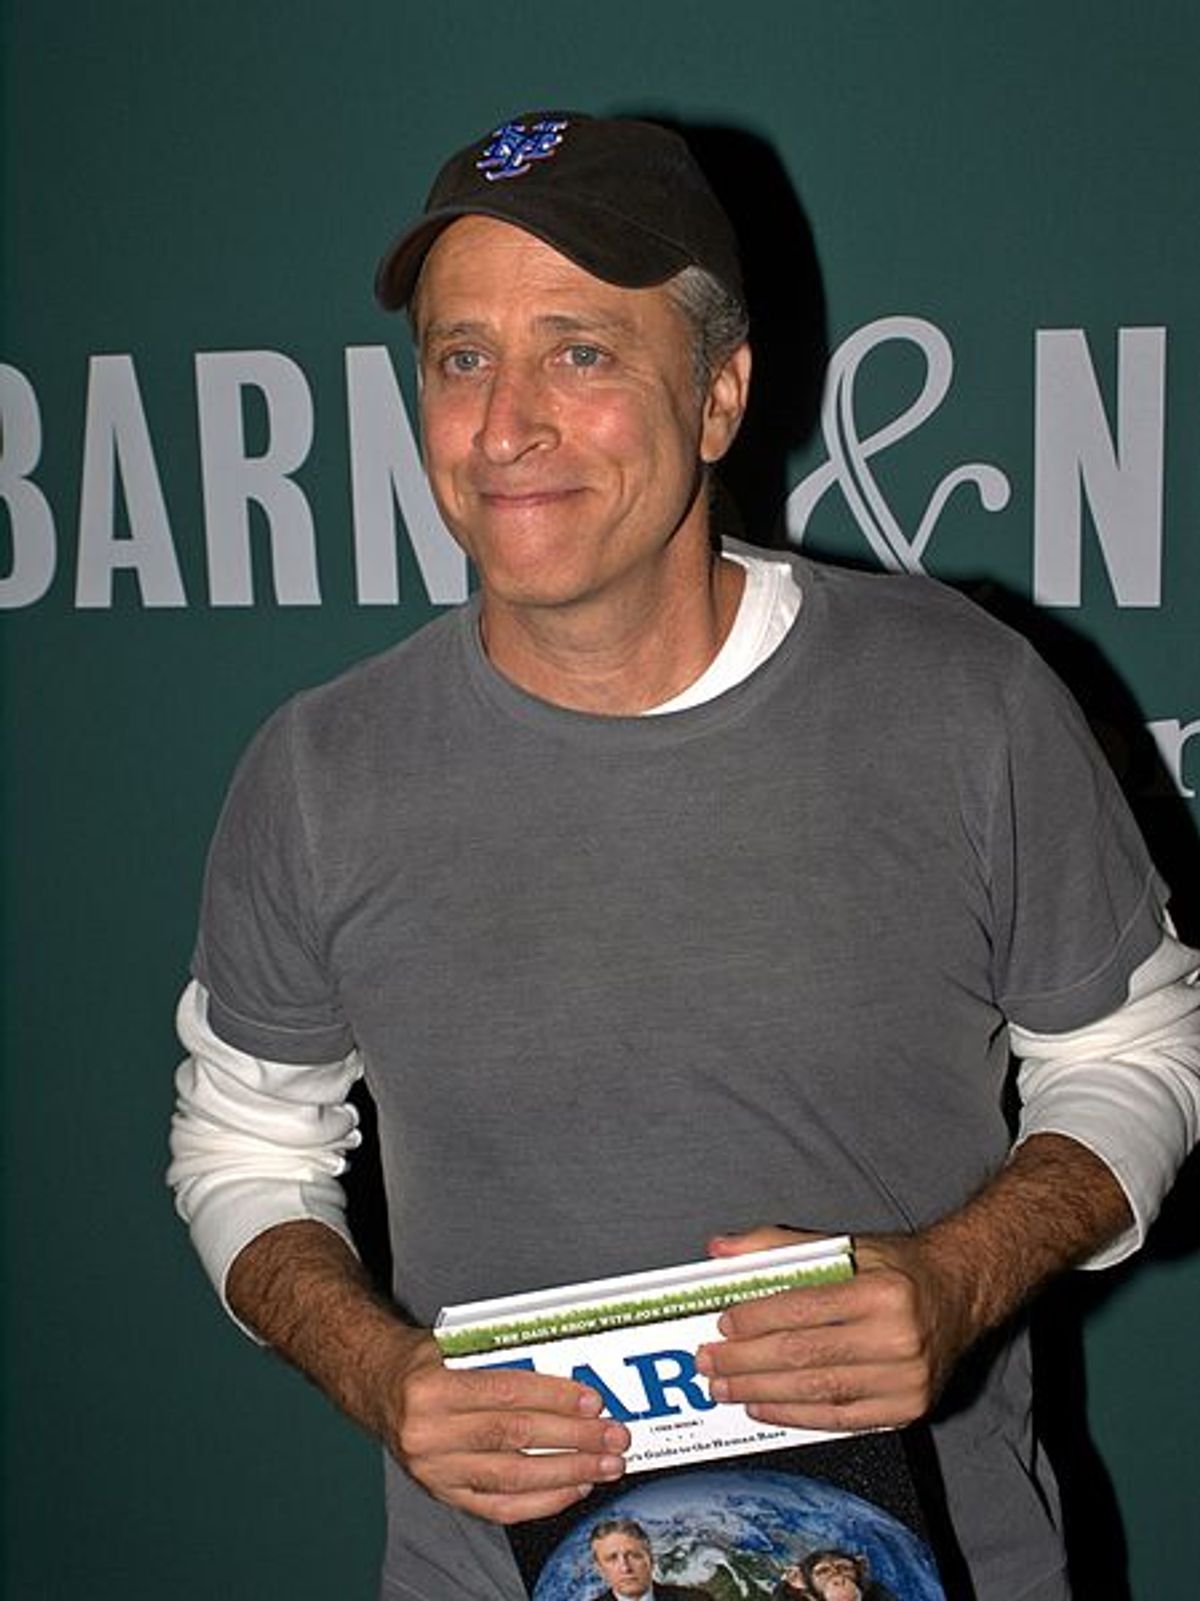 Daily Show host Jon Stewart at the launch of "Earth (The Book)" last year